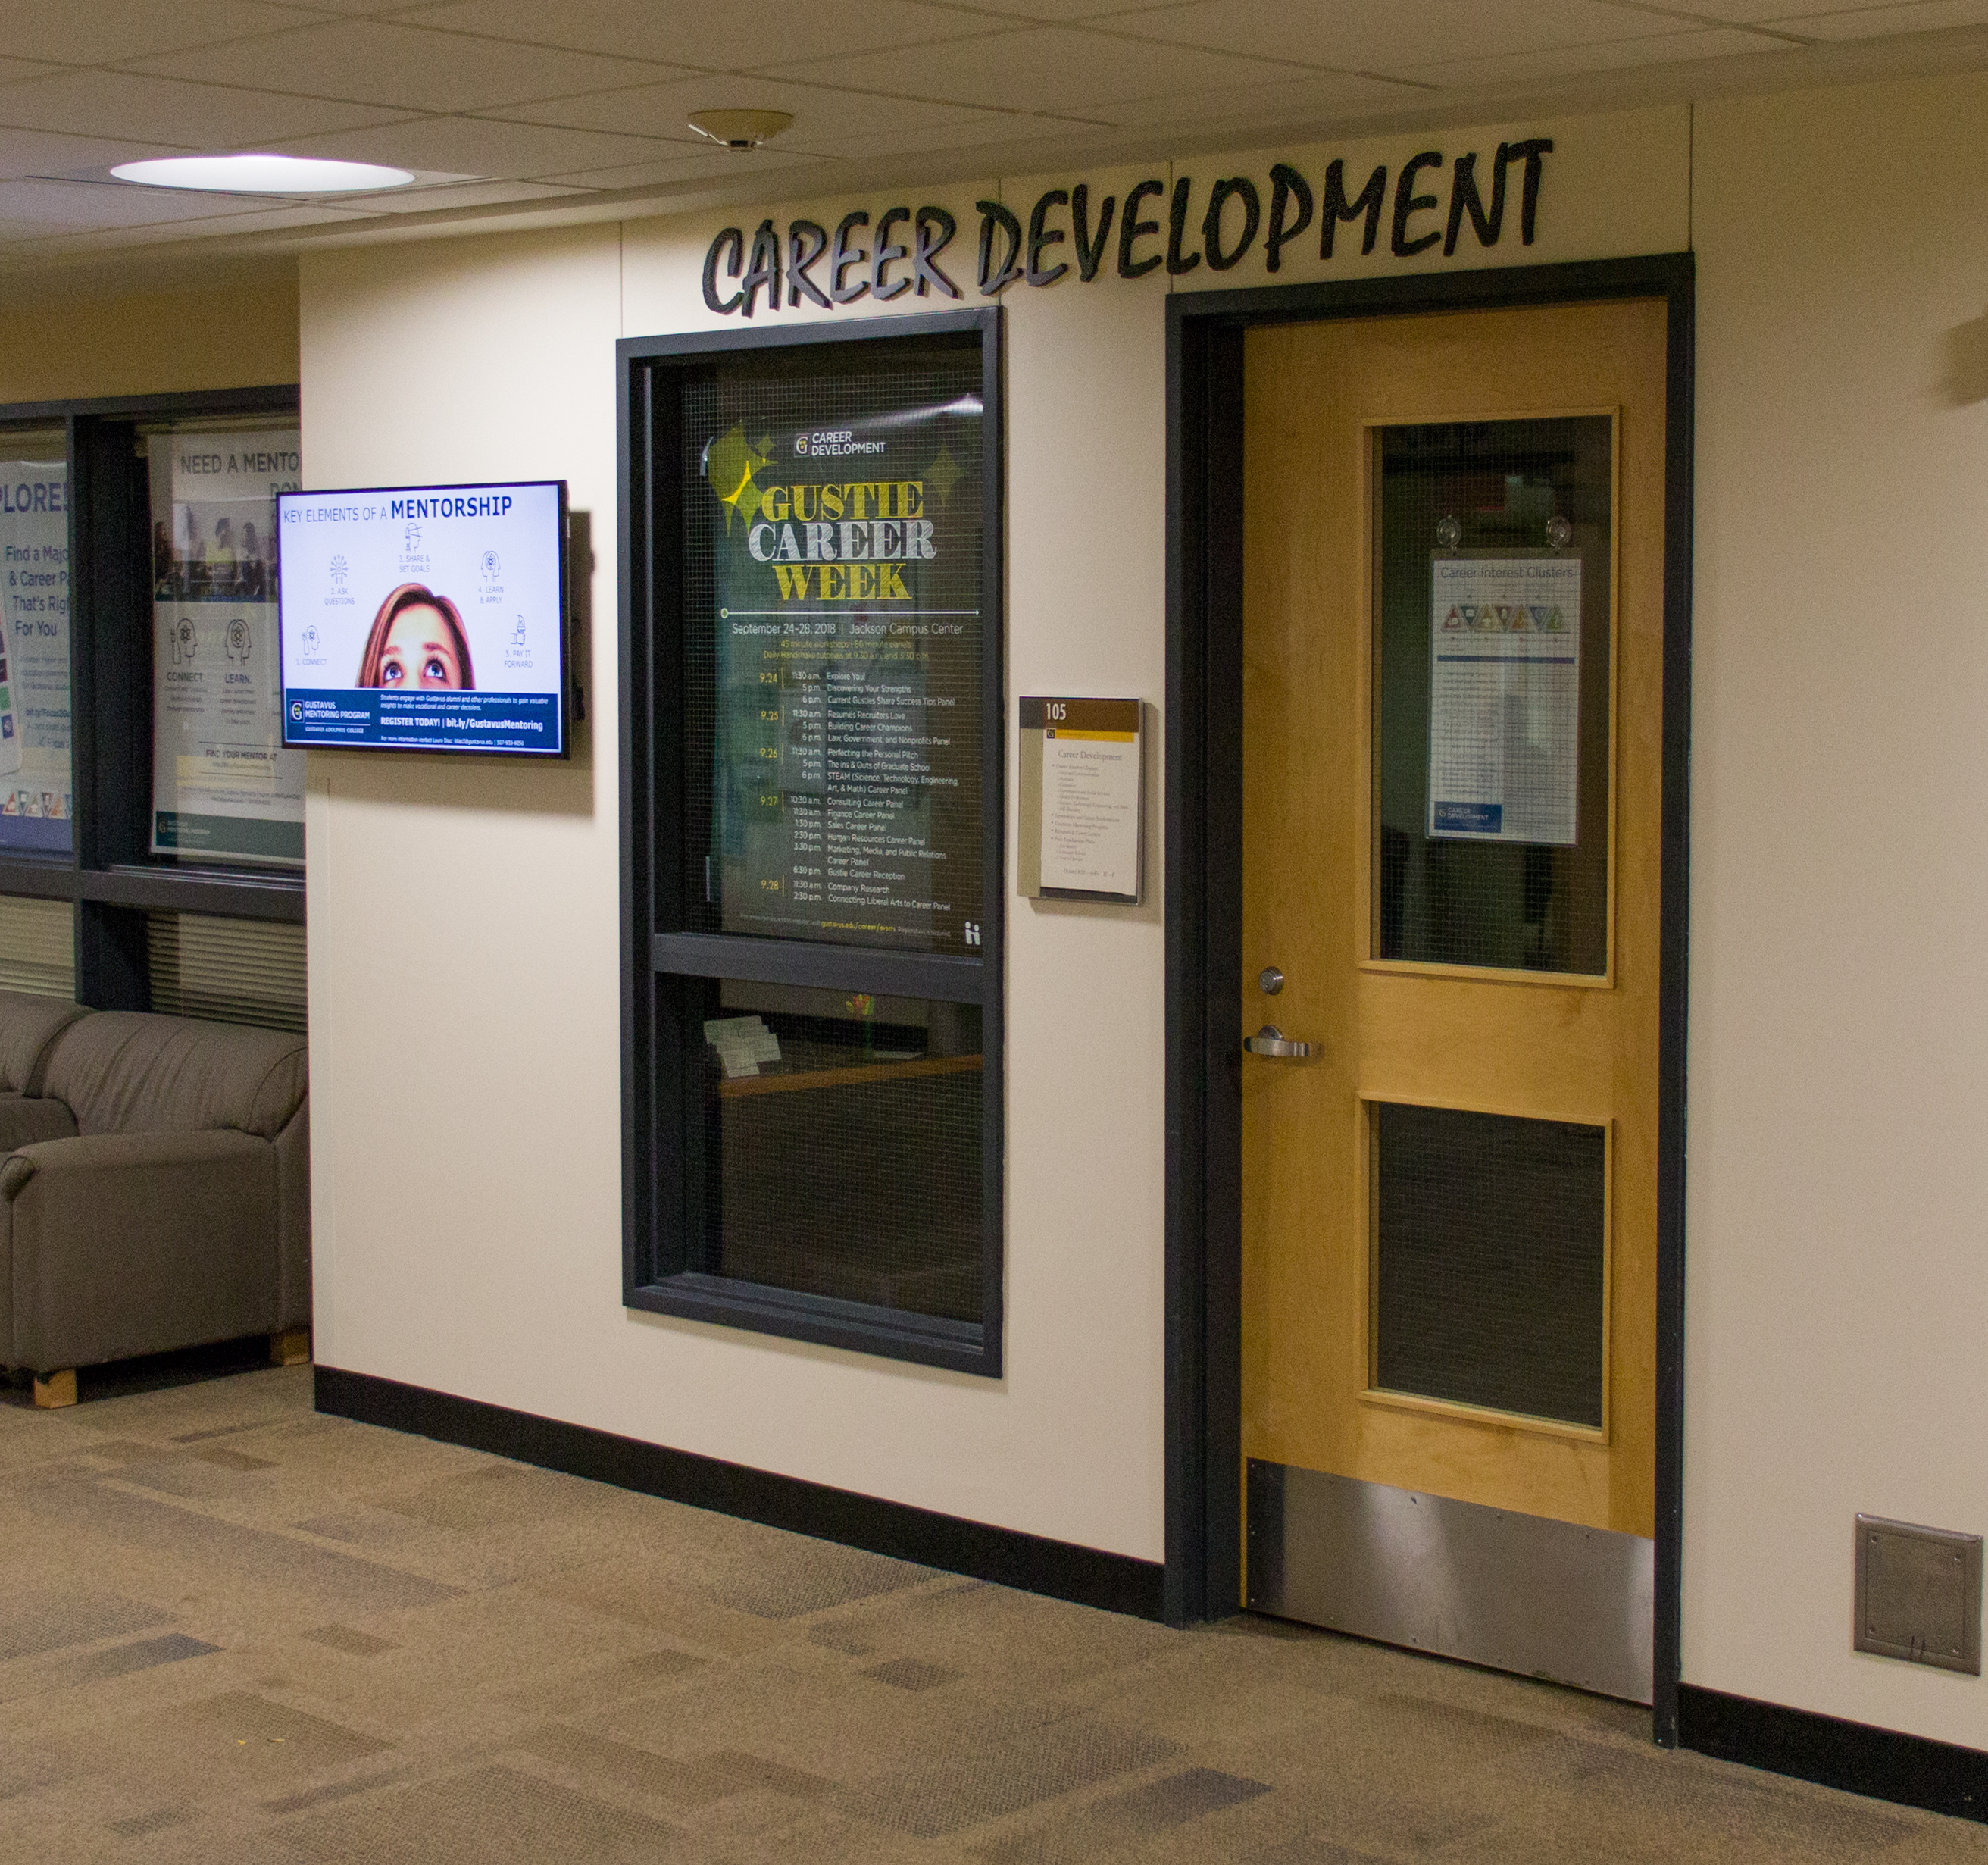 The Career Development Office is located on the lower level of the Jackson Campus Center.